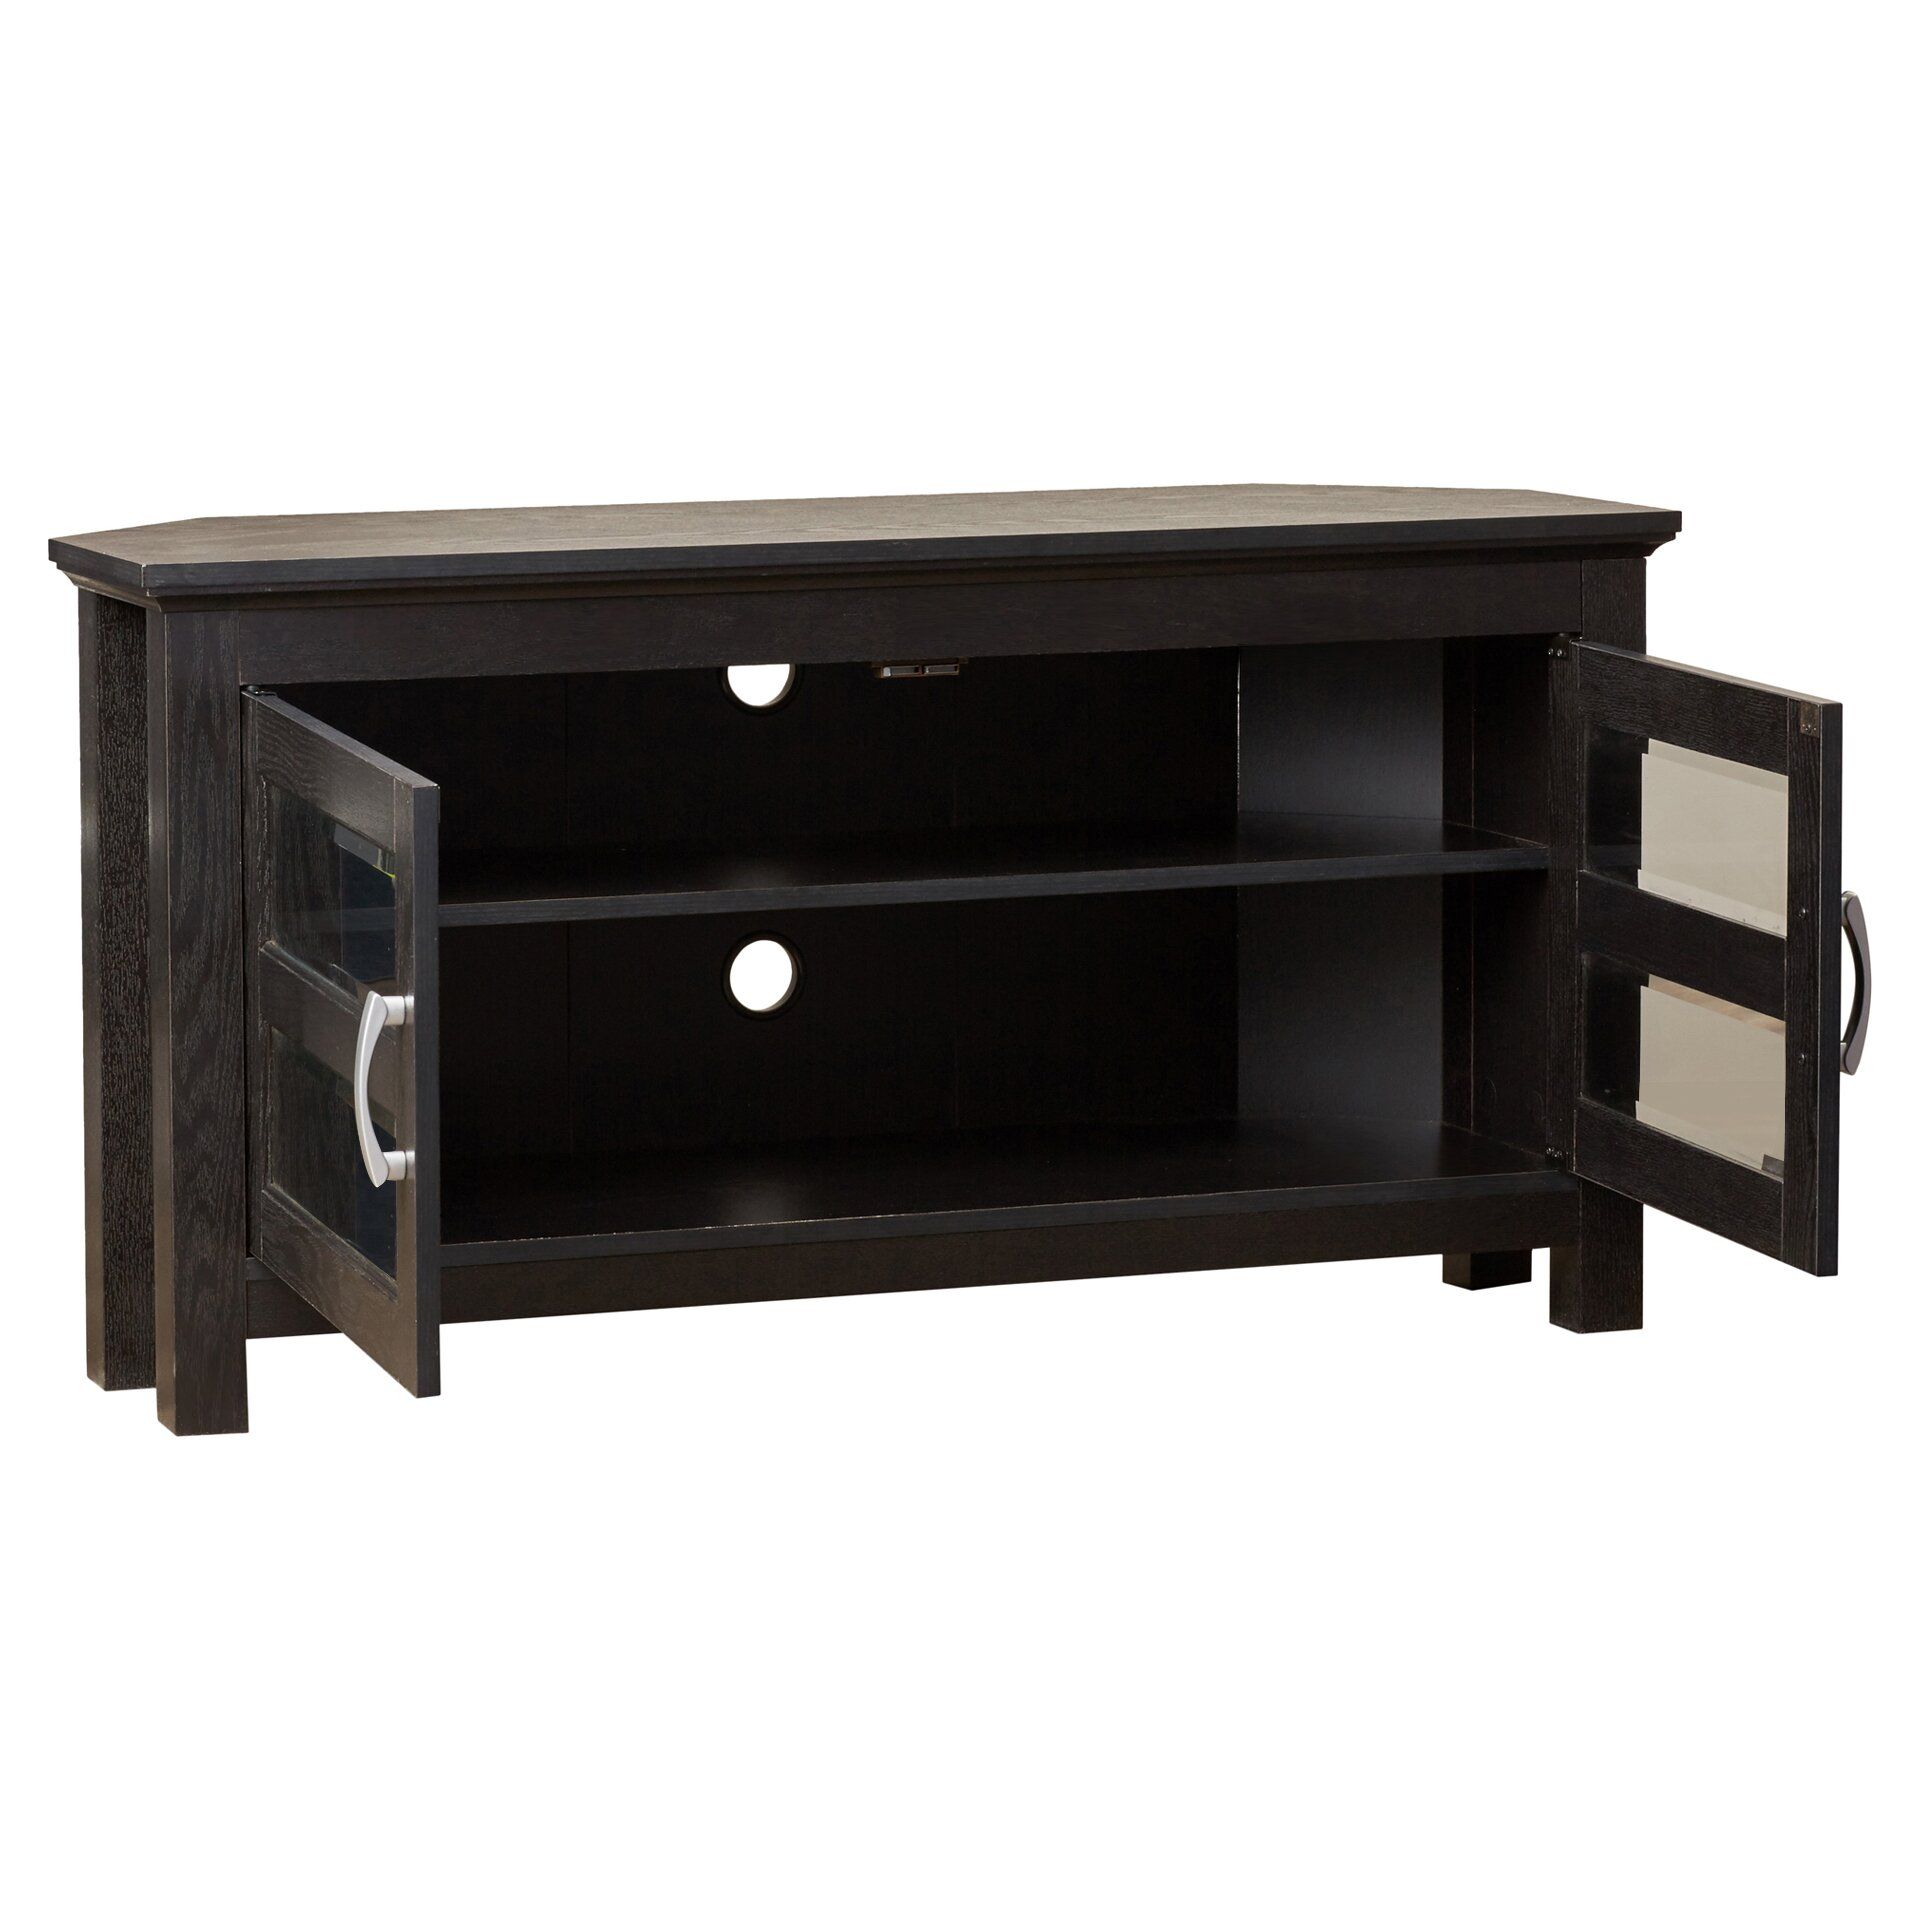 Alcott Hill Sulyard Wood Corner Tv Stand & Reviews | Wayfair Within Wooden Corner Tv Stands (View 10 of 15)